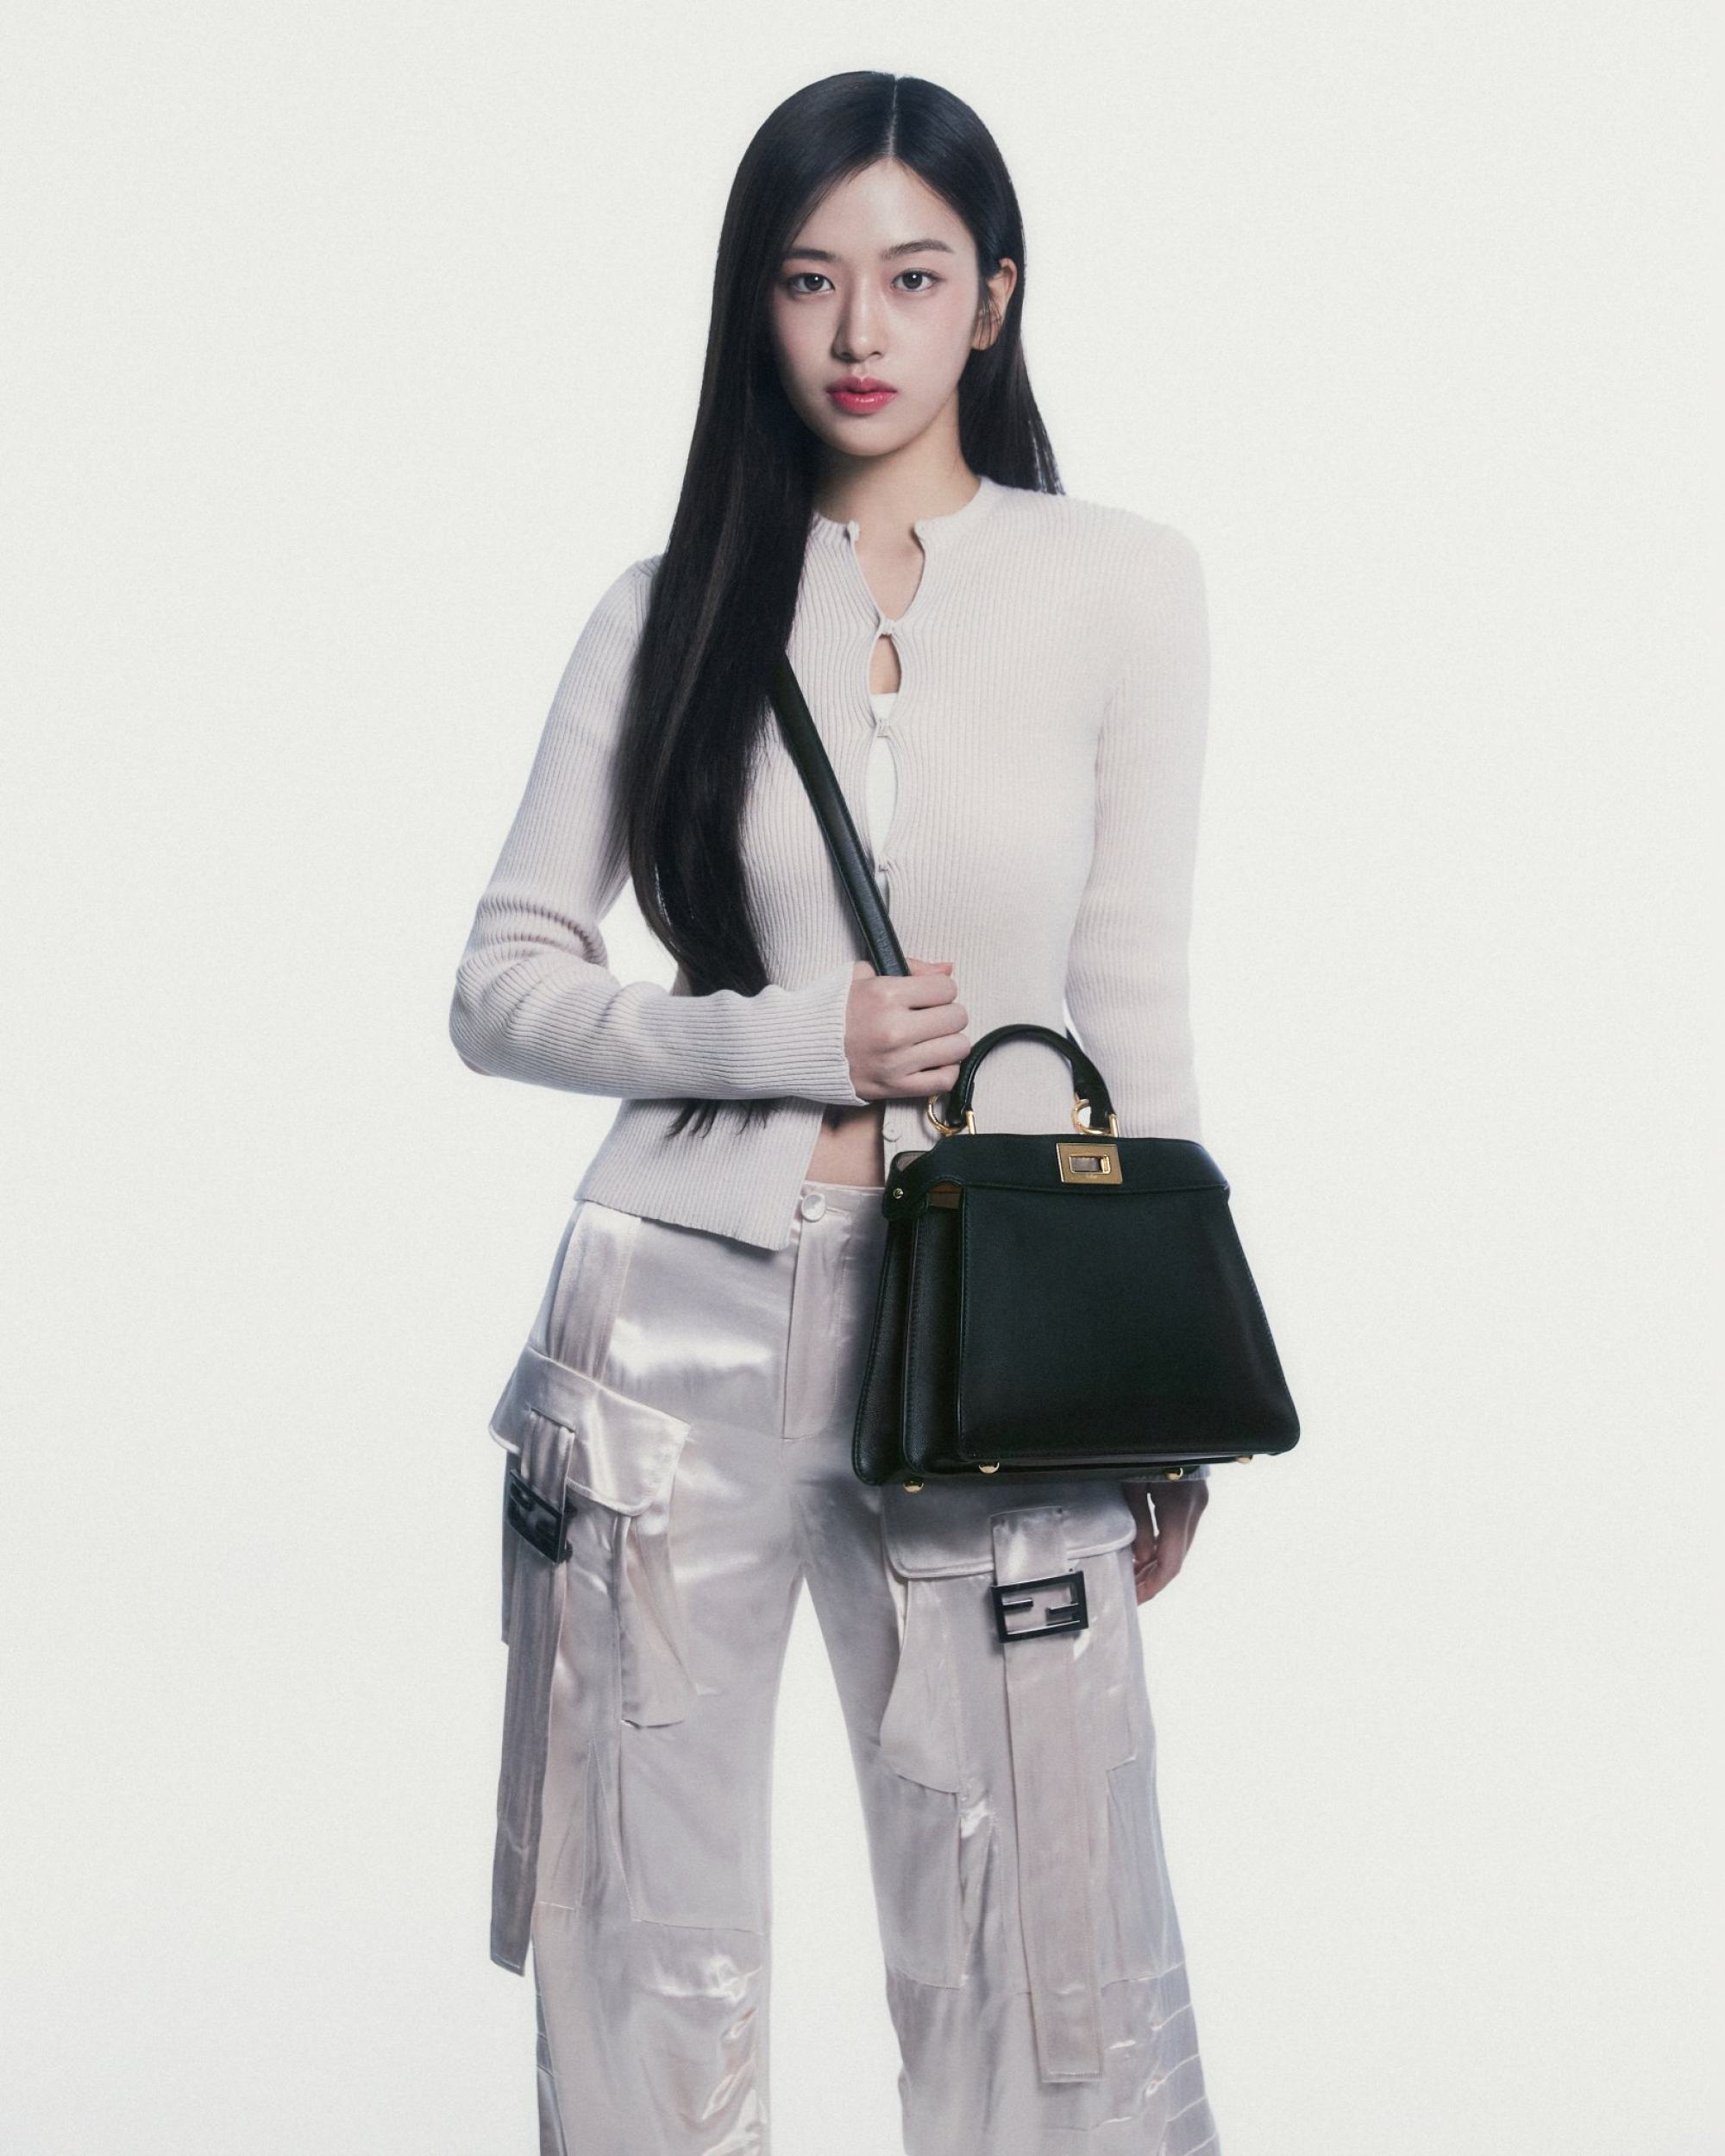 7 new Asian luxury brand ambassadors to watch in 2023, from BTS